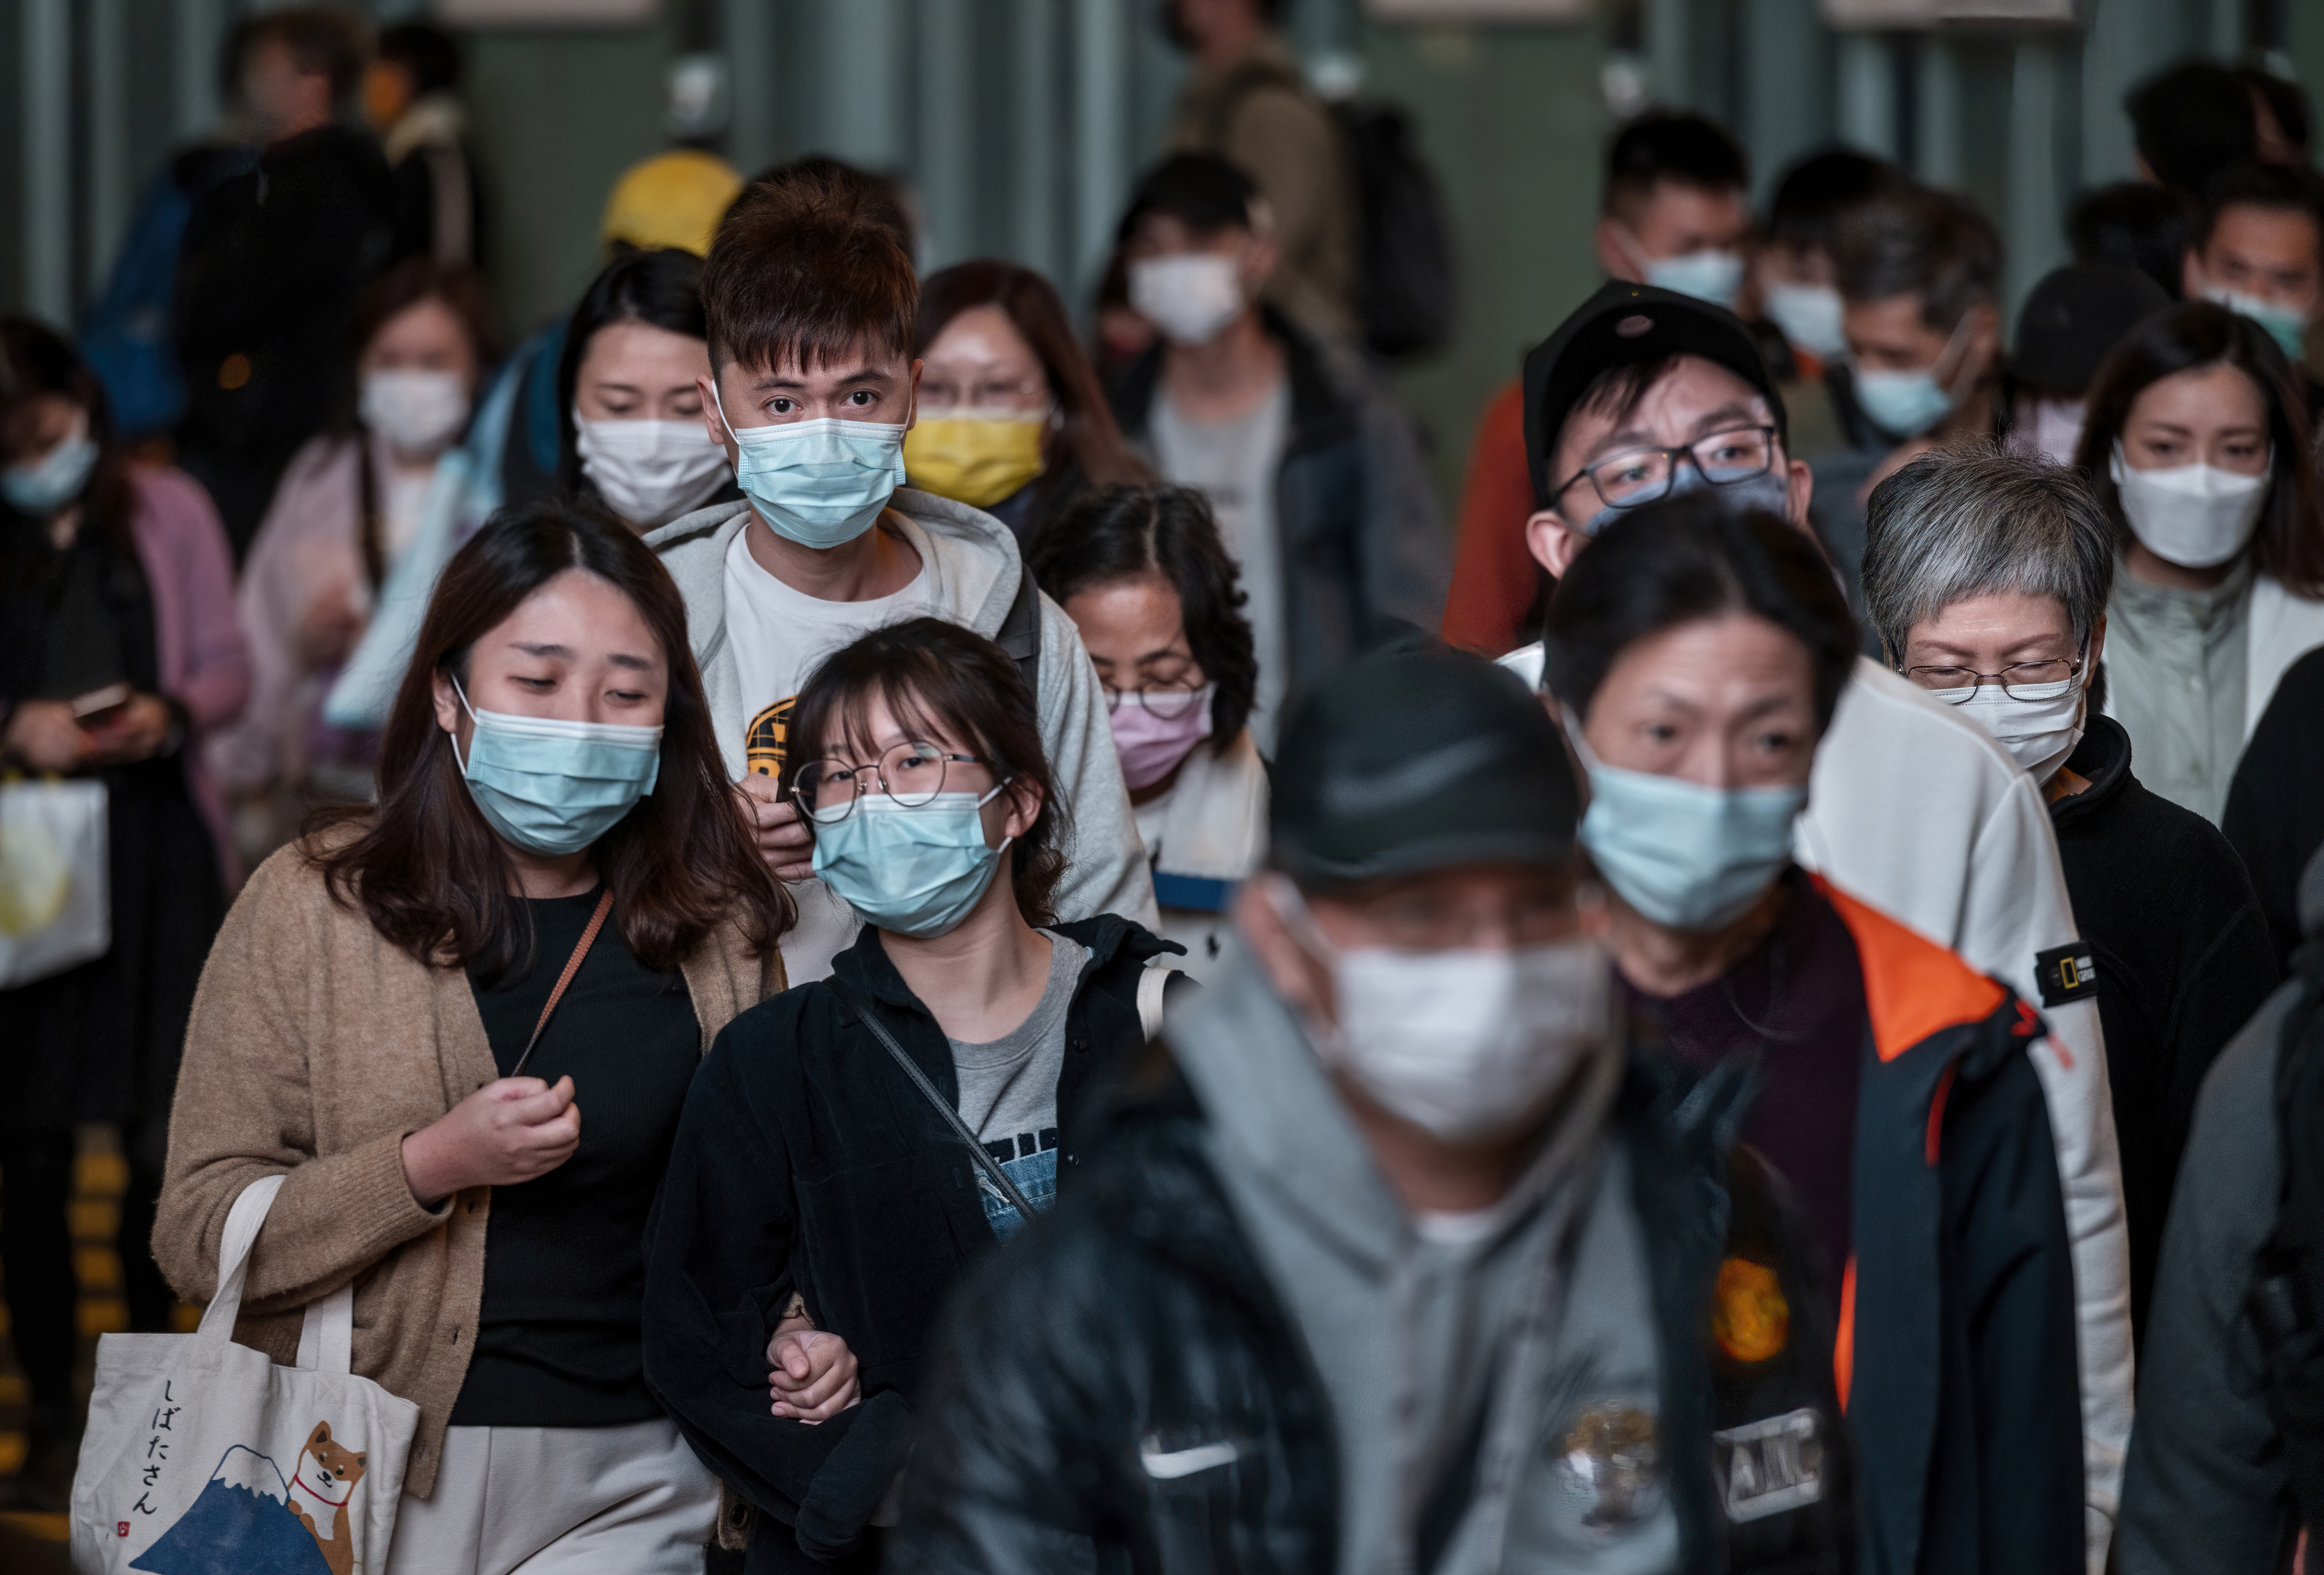 A large crowd of people is seen wearing face masks as a preventive measure against the spread of coronavirus as they walk through a zebra crossing in Hong Kong, China, on 12 December 2021.